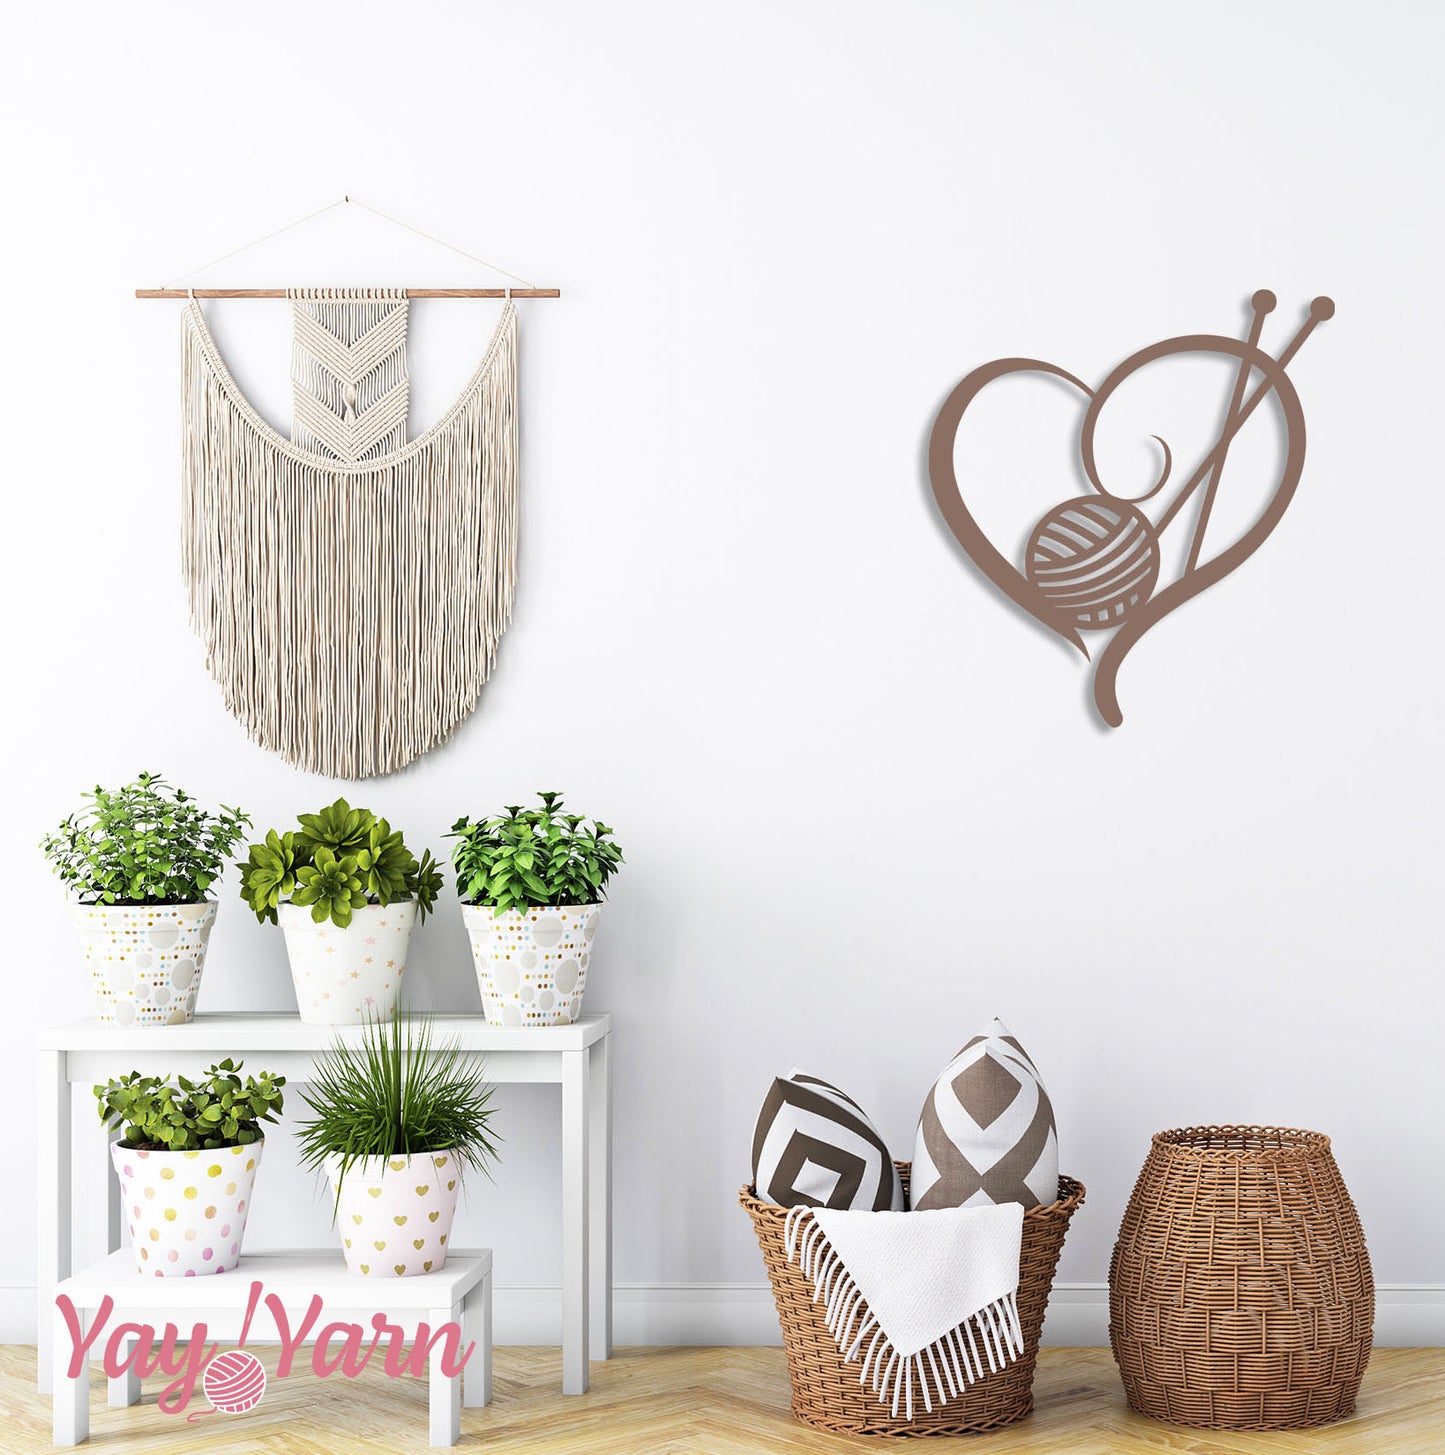 Knit Heart Metal Wall Art Copper on White Wall with Boho Baskets